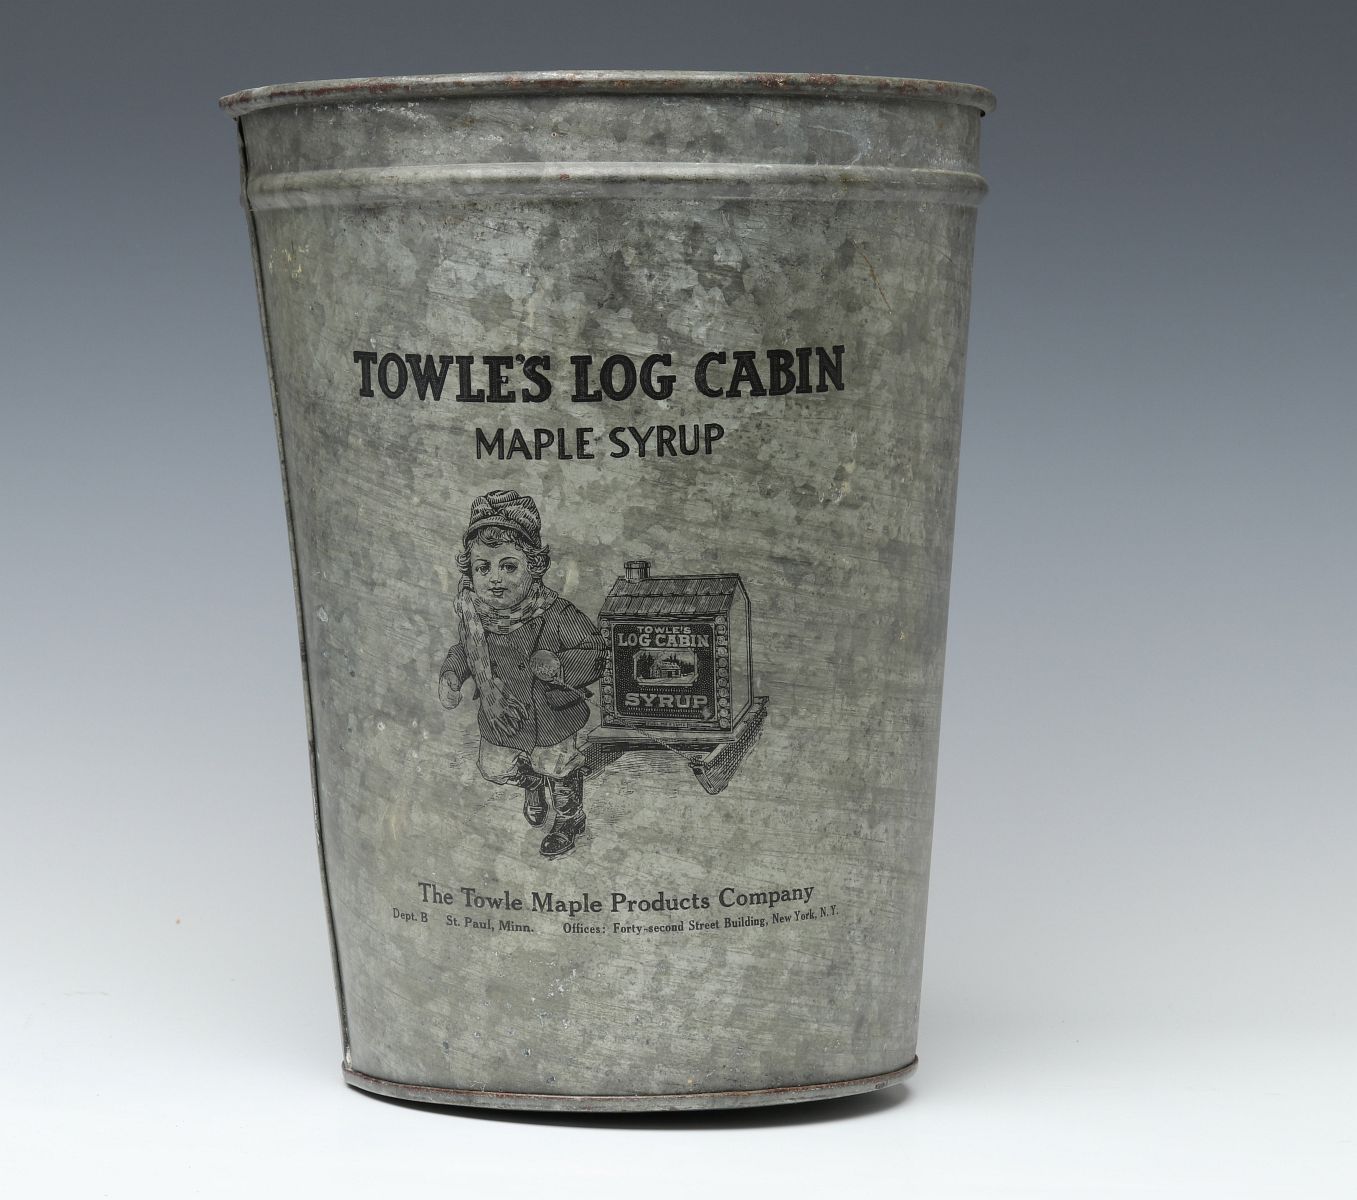 ADVERTISING SAP BUCKET FOR TOWLE'S LOG CABIN SYRUP